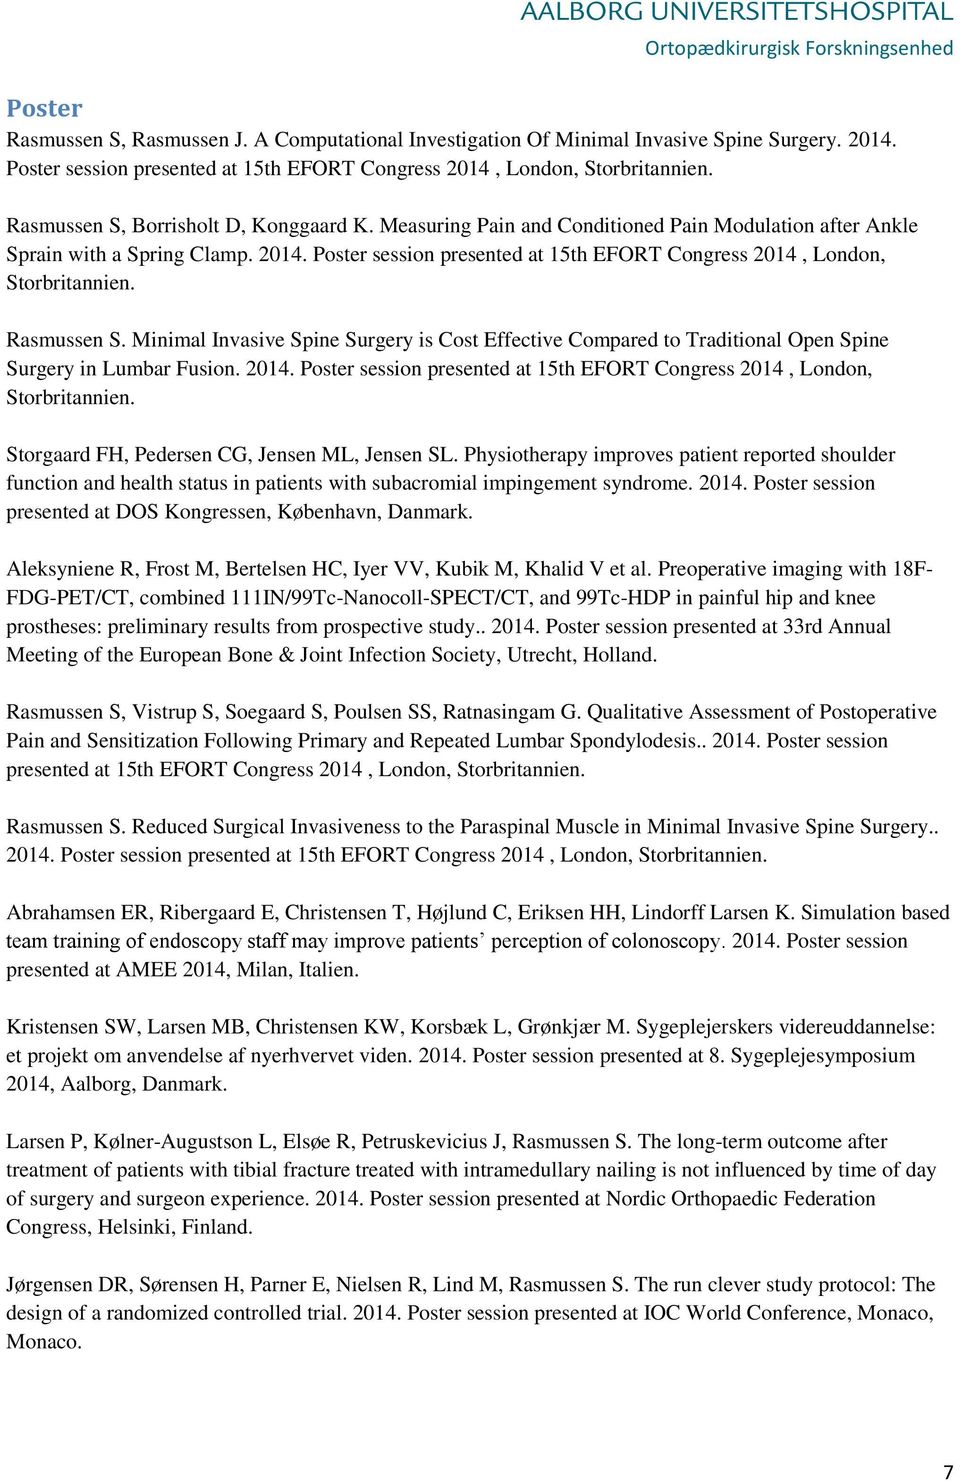 Poster session presented at 15th EFORT Congress 2014, London, Storbritannien. Rasmussen S. Minimal Invasive Spine Surgery is Cost Effective Compared to Traditional Open Spine Surgery in Lumbar Fusion.